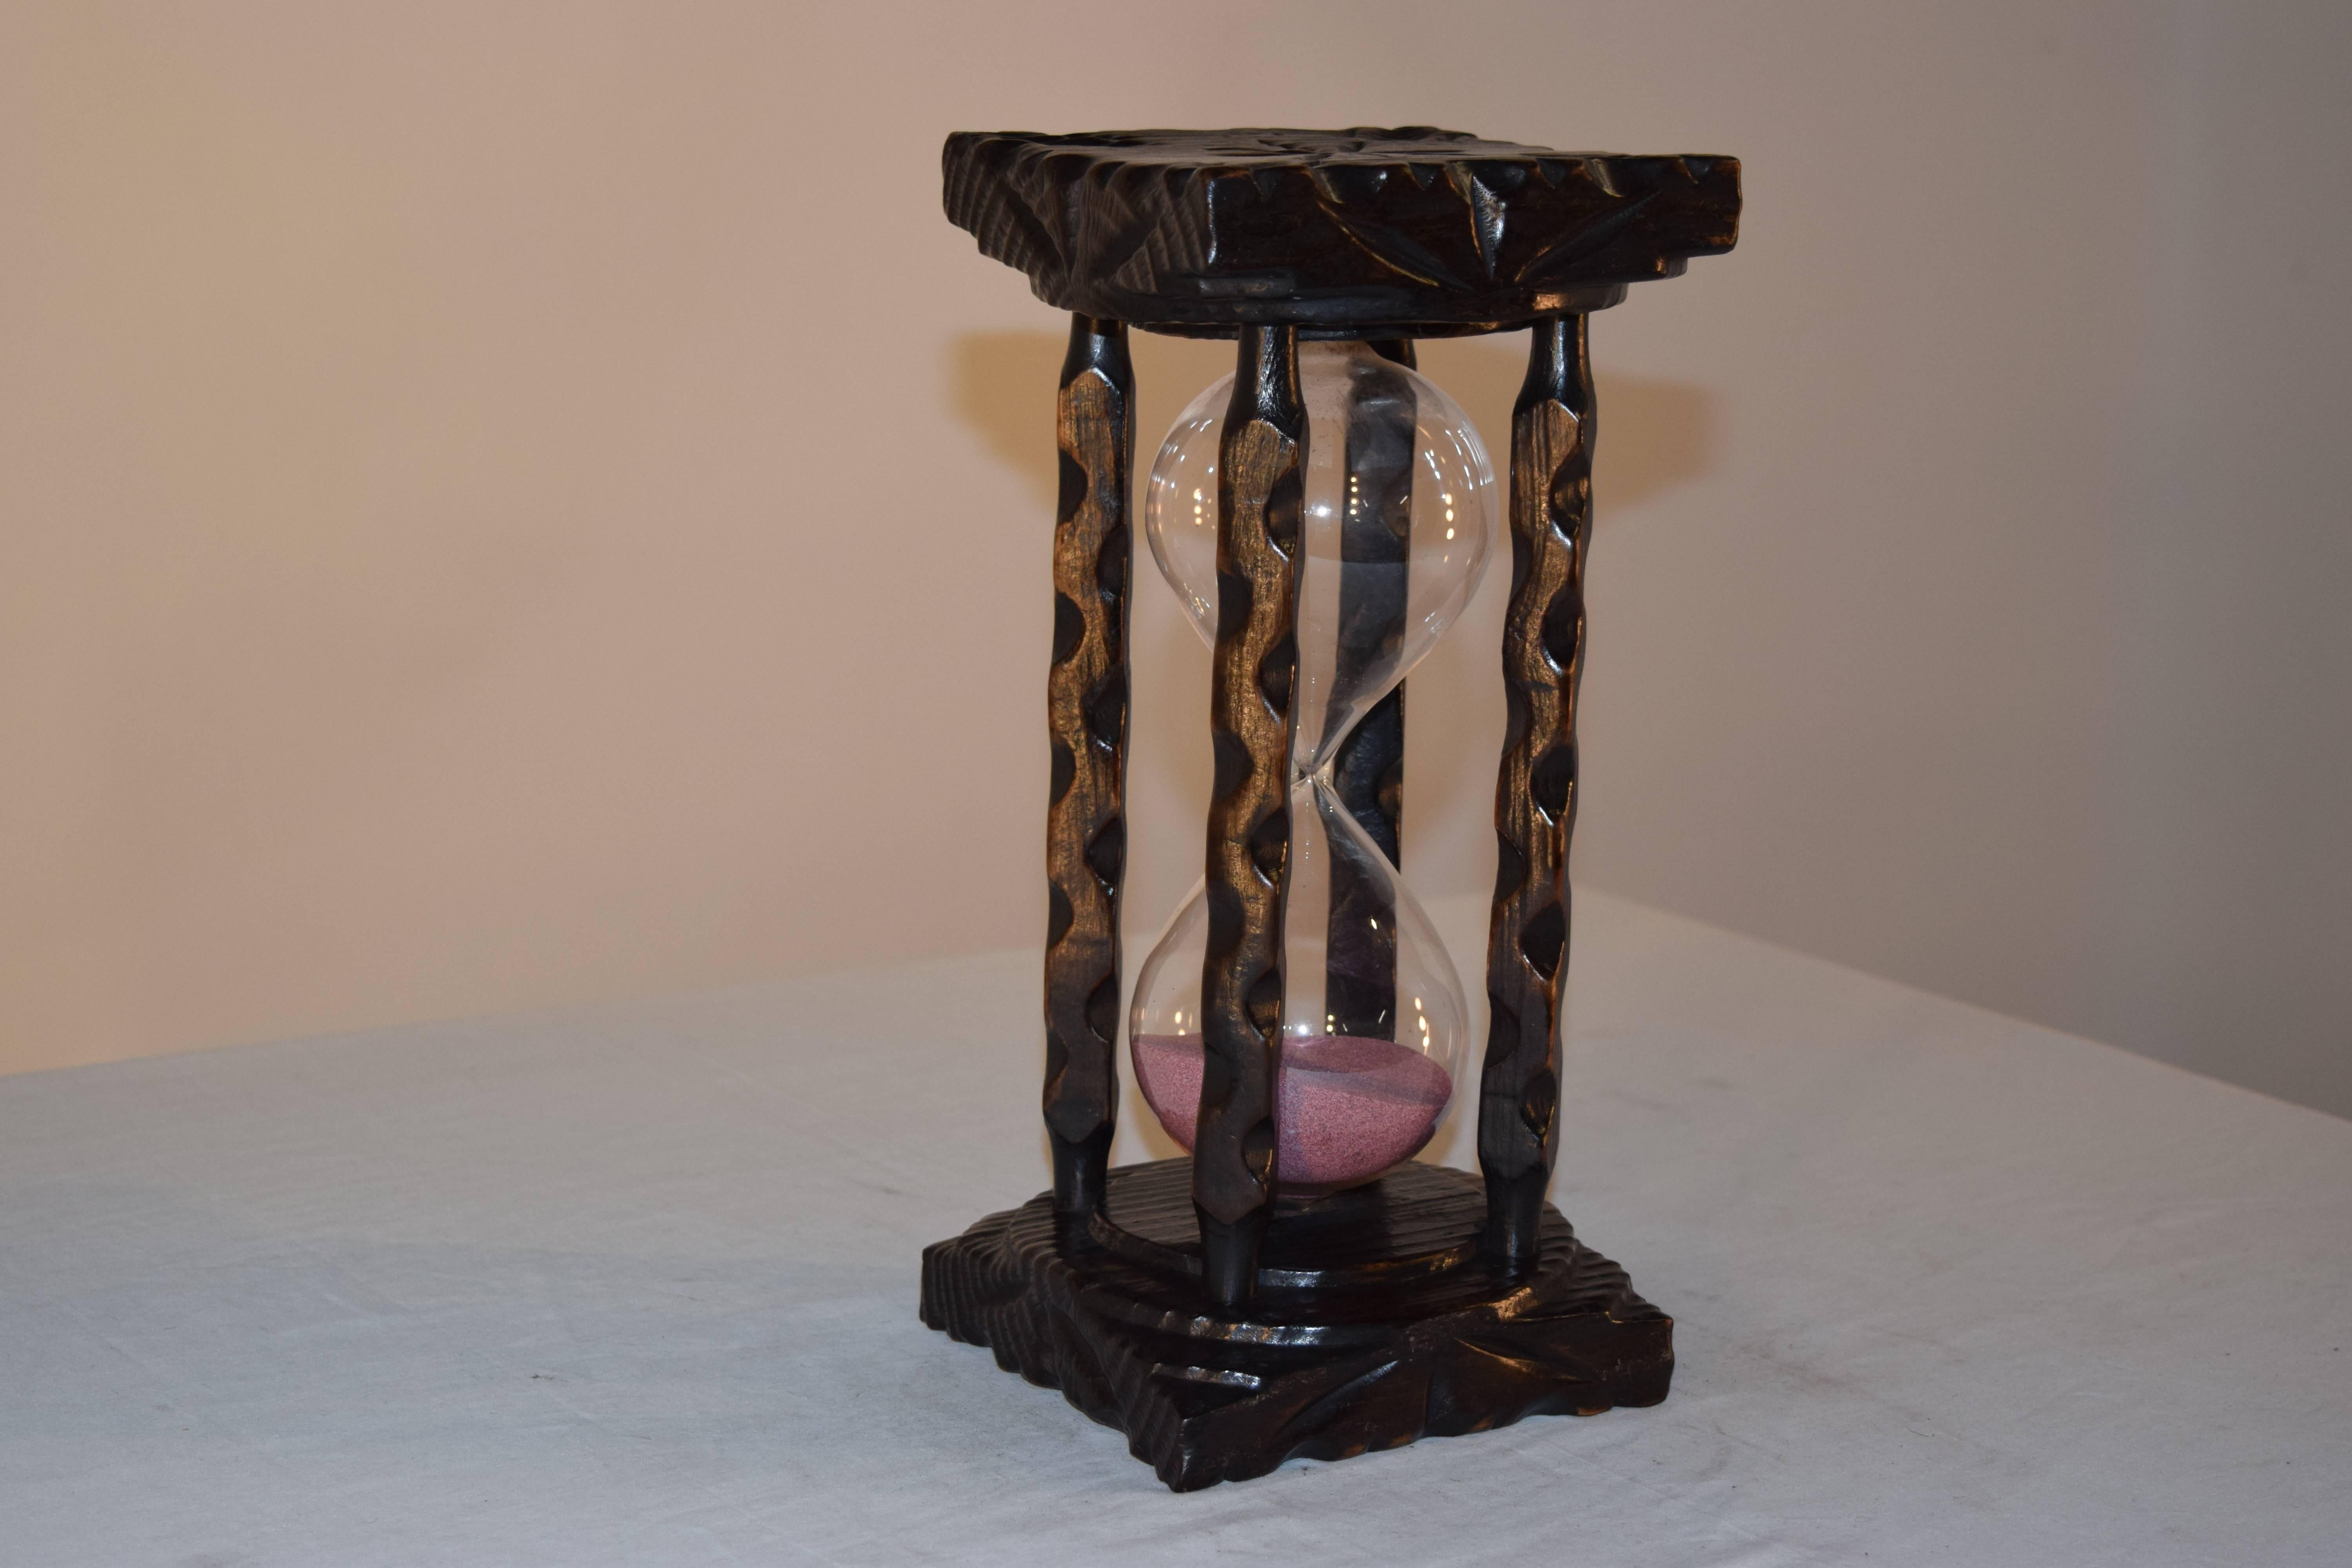 19th century hand-carved hourglass from England. The top and bottom are hand-carved and are joined by hand-carved spindles. The glass is handblown and is filled with sand.